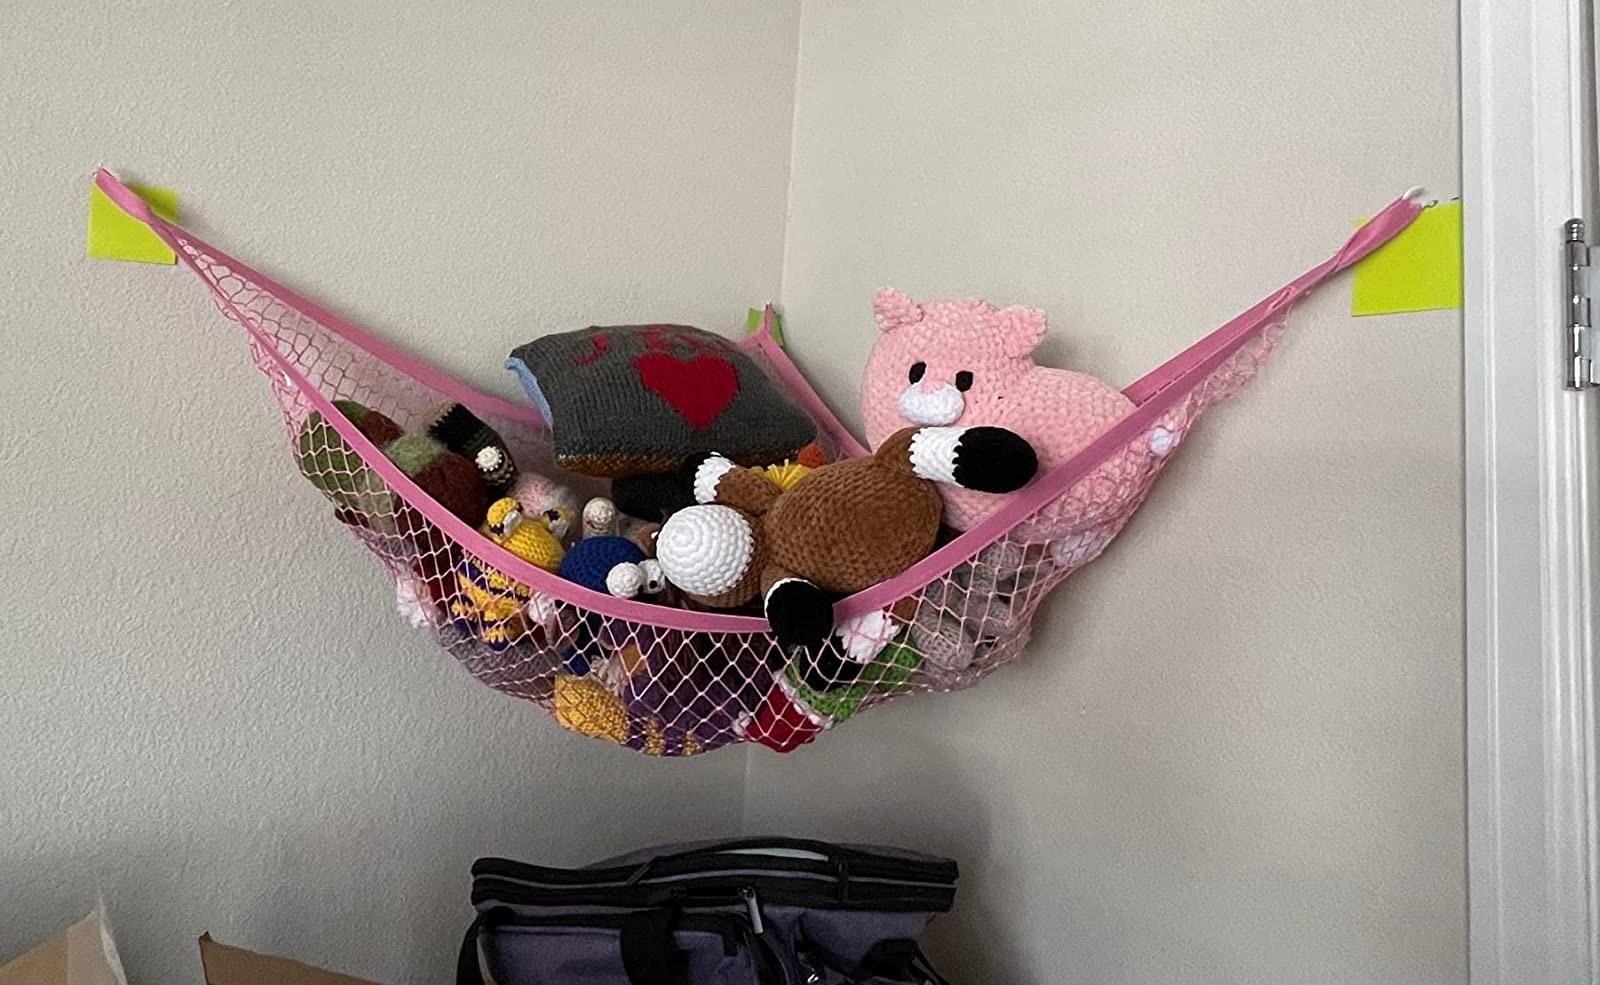 Reviewer image of stuffed animals in a pink hammock hanging in a room corner